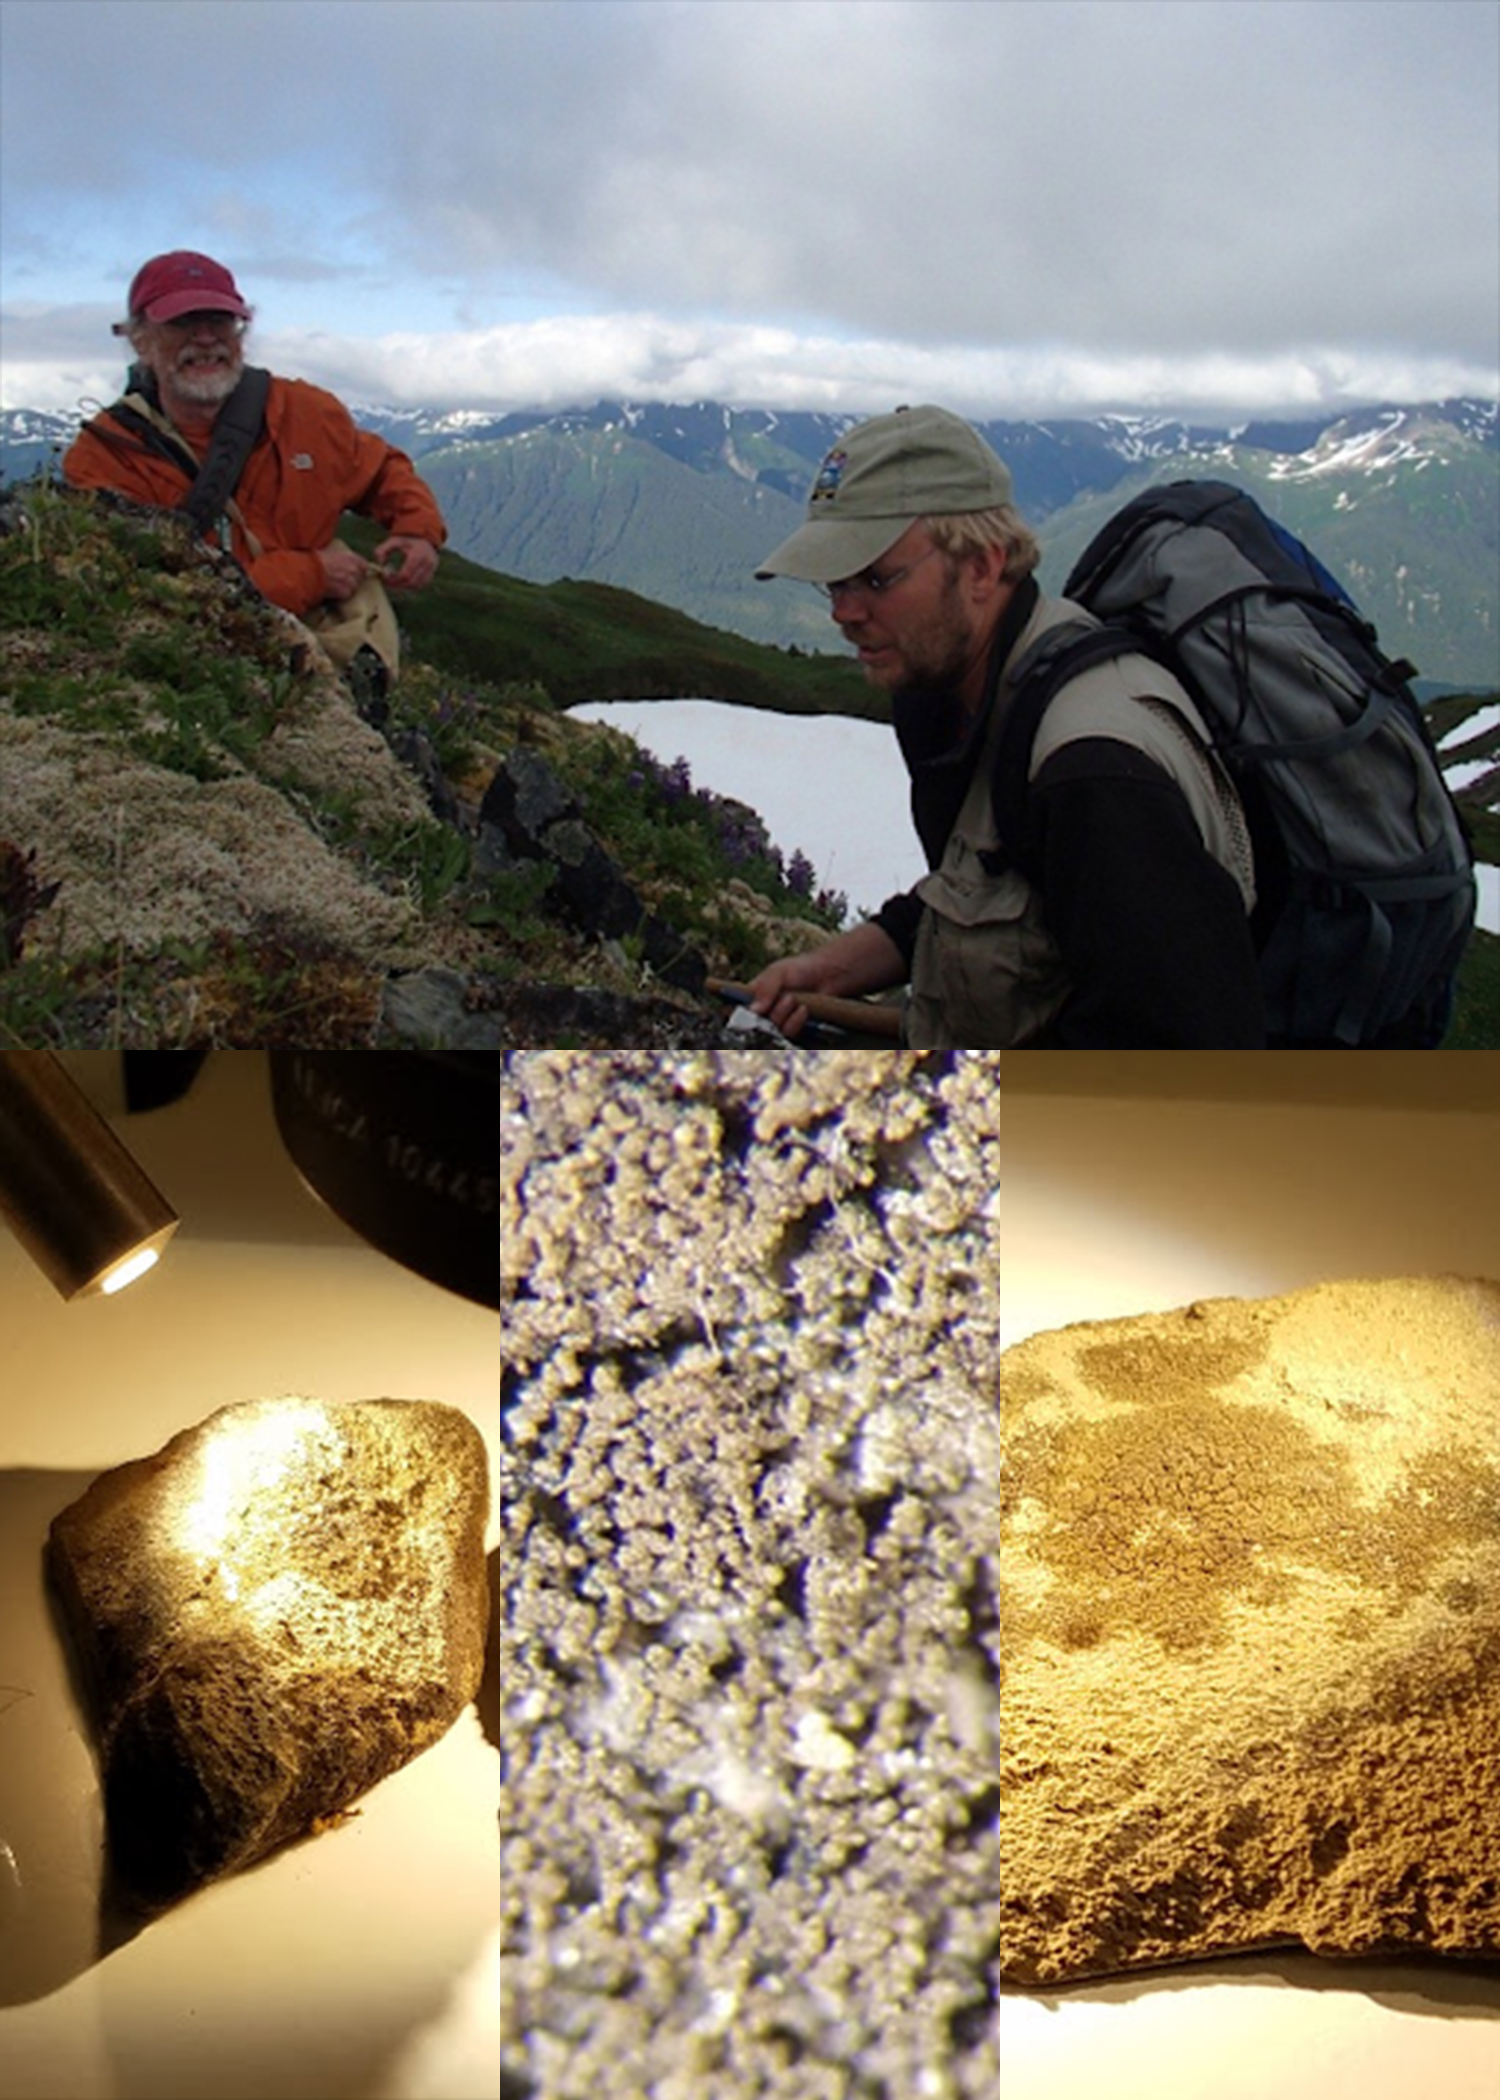 Top: two men on a mountain. Bottom: three images of lichen species on rocks